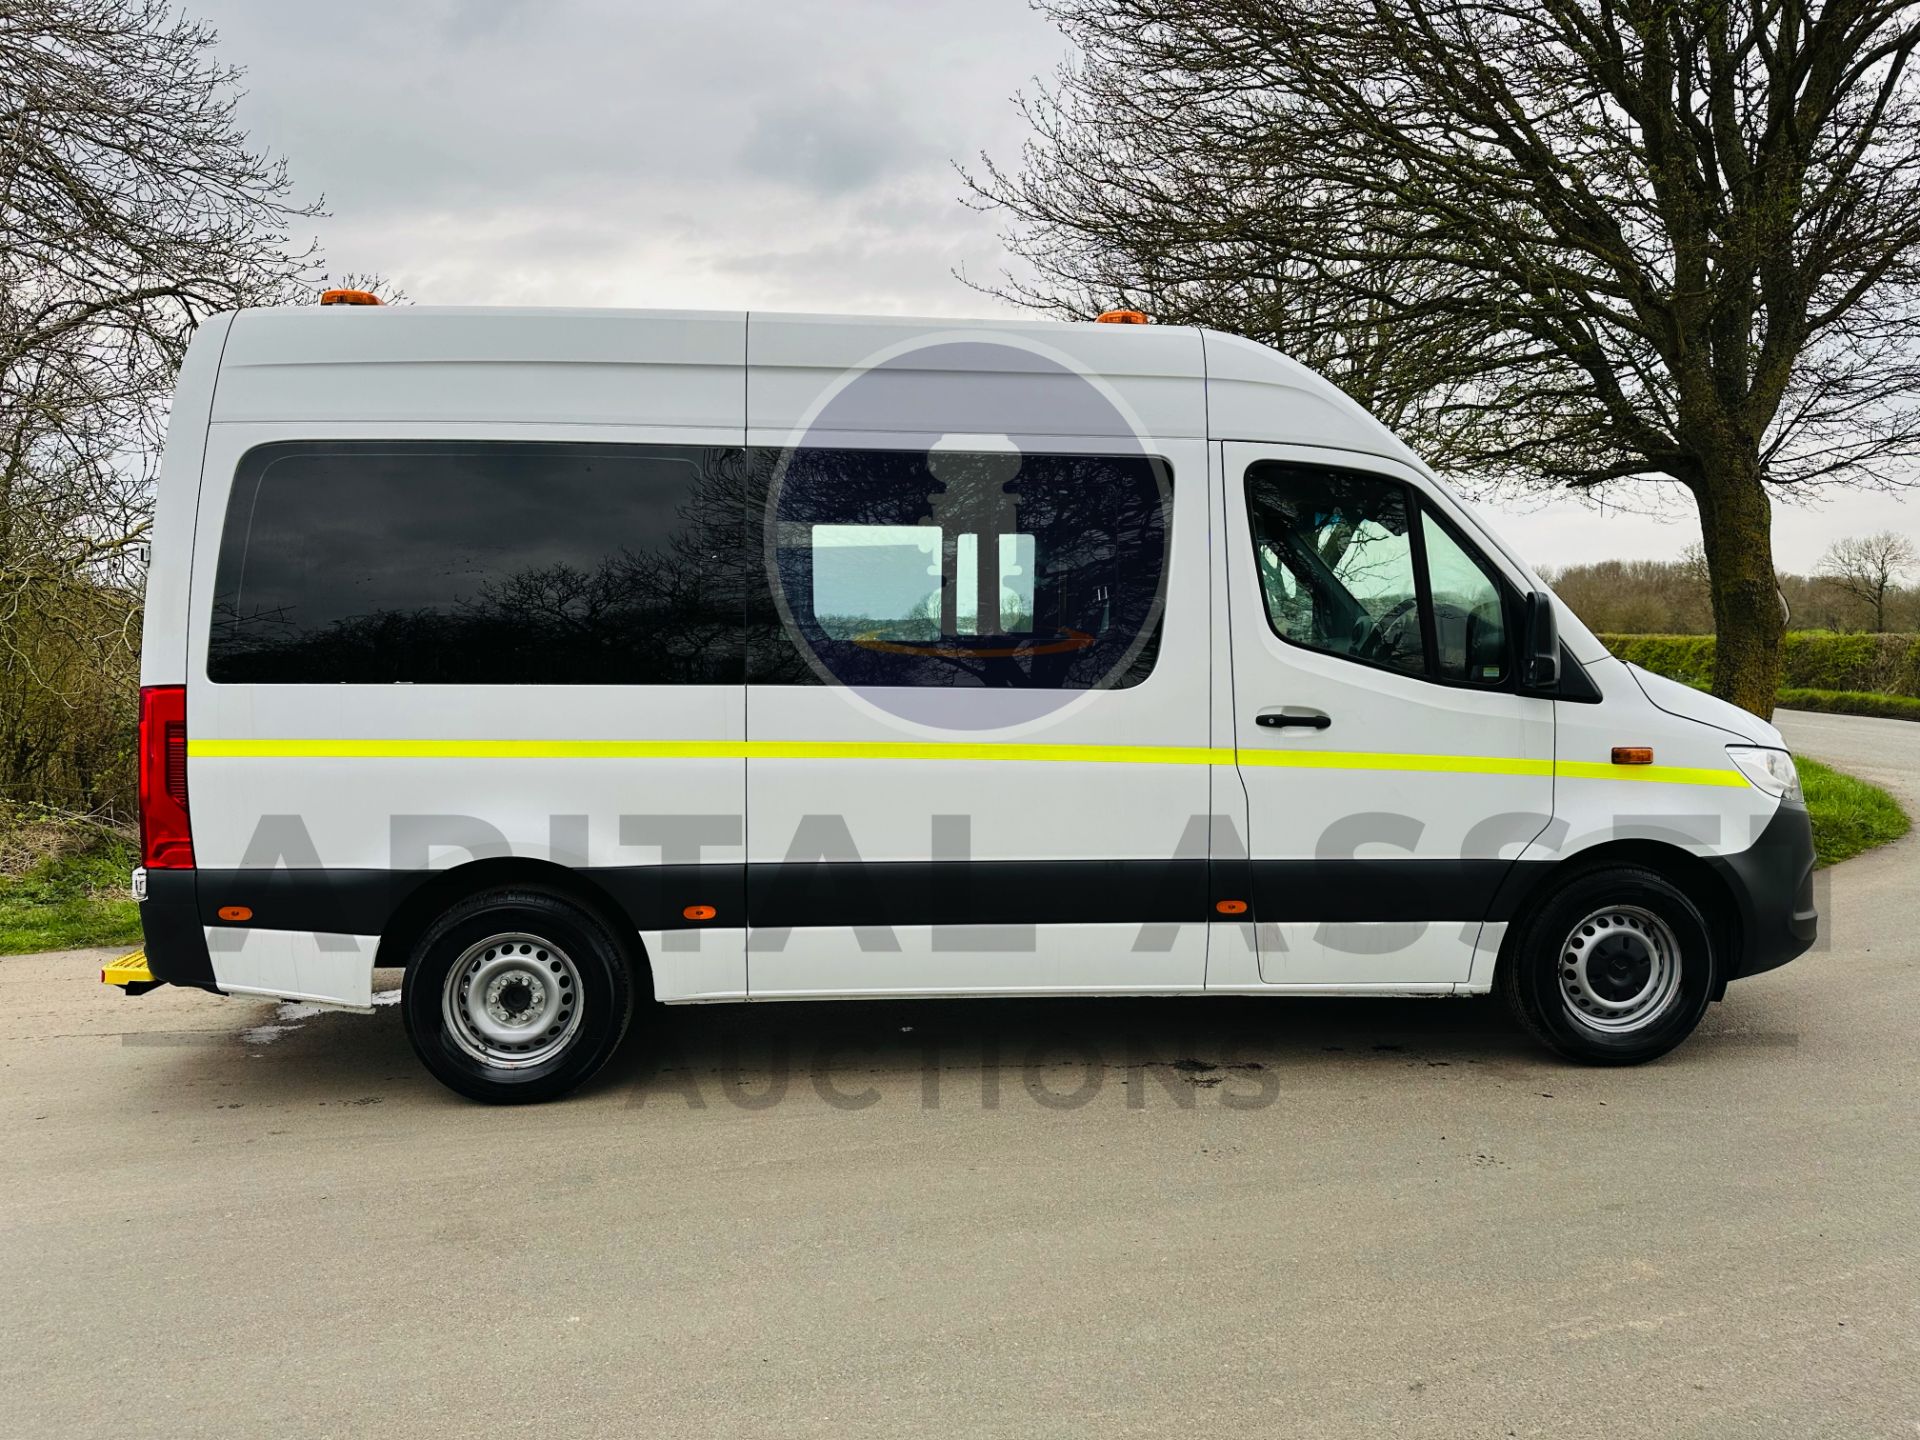 (ON SALE) MERCEDES SPRINTER 314CDI AUTO MWB MESSING UNIT WITH W/C,MICROWAVE,- 2020 REG- - AIR CON - Image 10 of 44